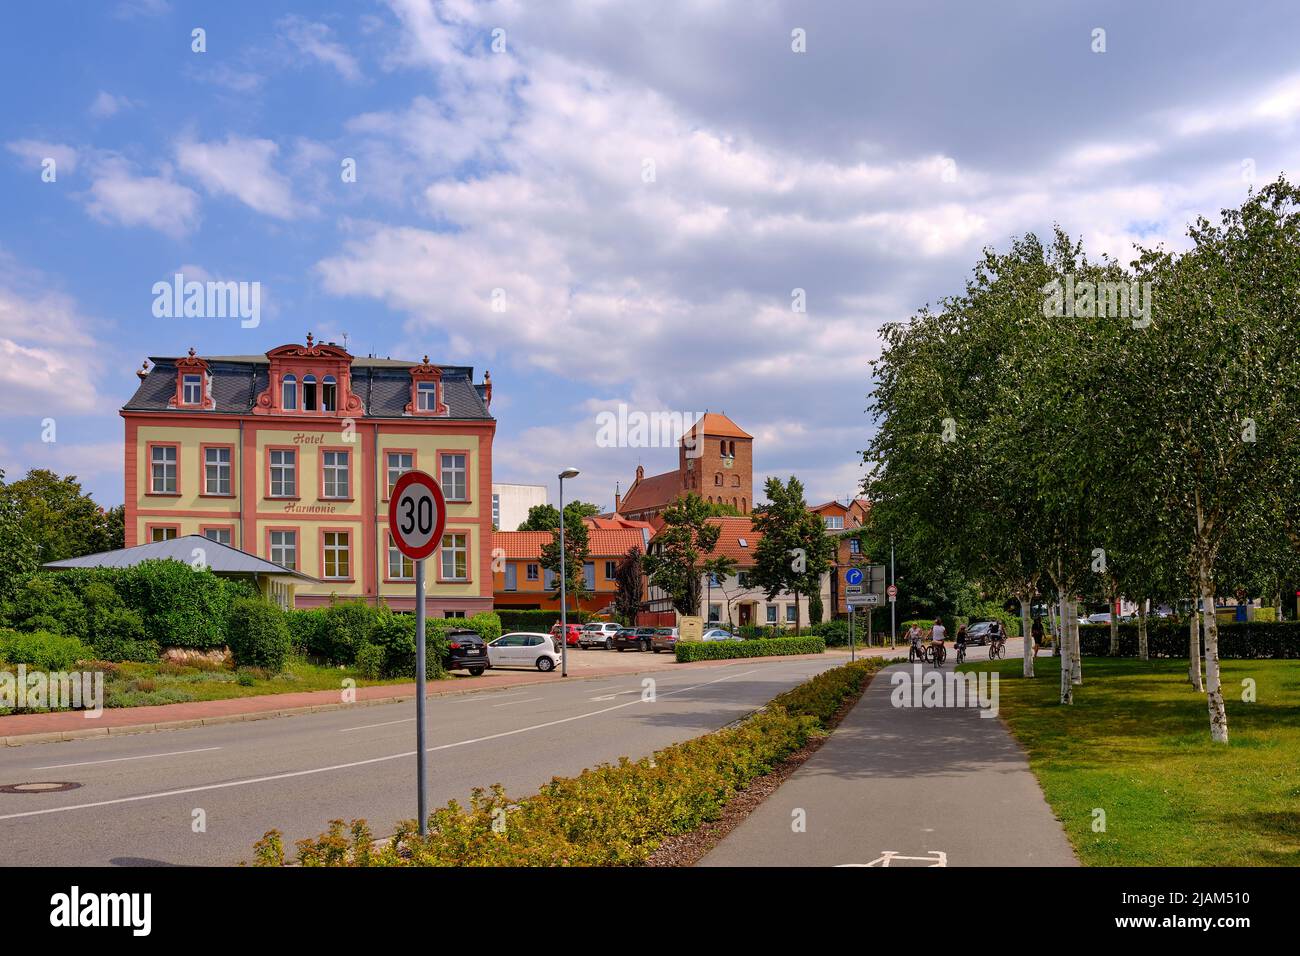 Streetscape of Hotel Harmonie and St. George's Church in the historic town centre of Waren an der Müritz, Mecklenburg-Western Pomerania, Germany. Stock Photo